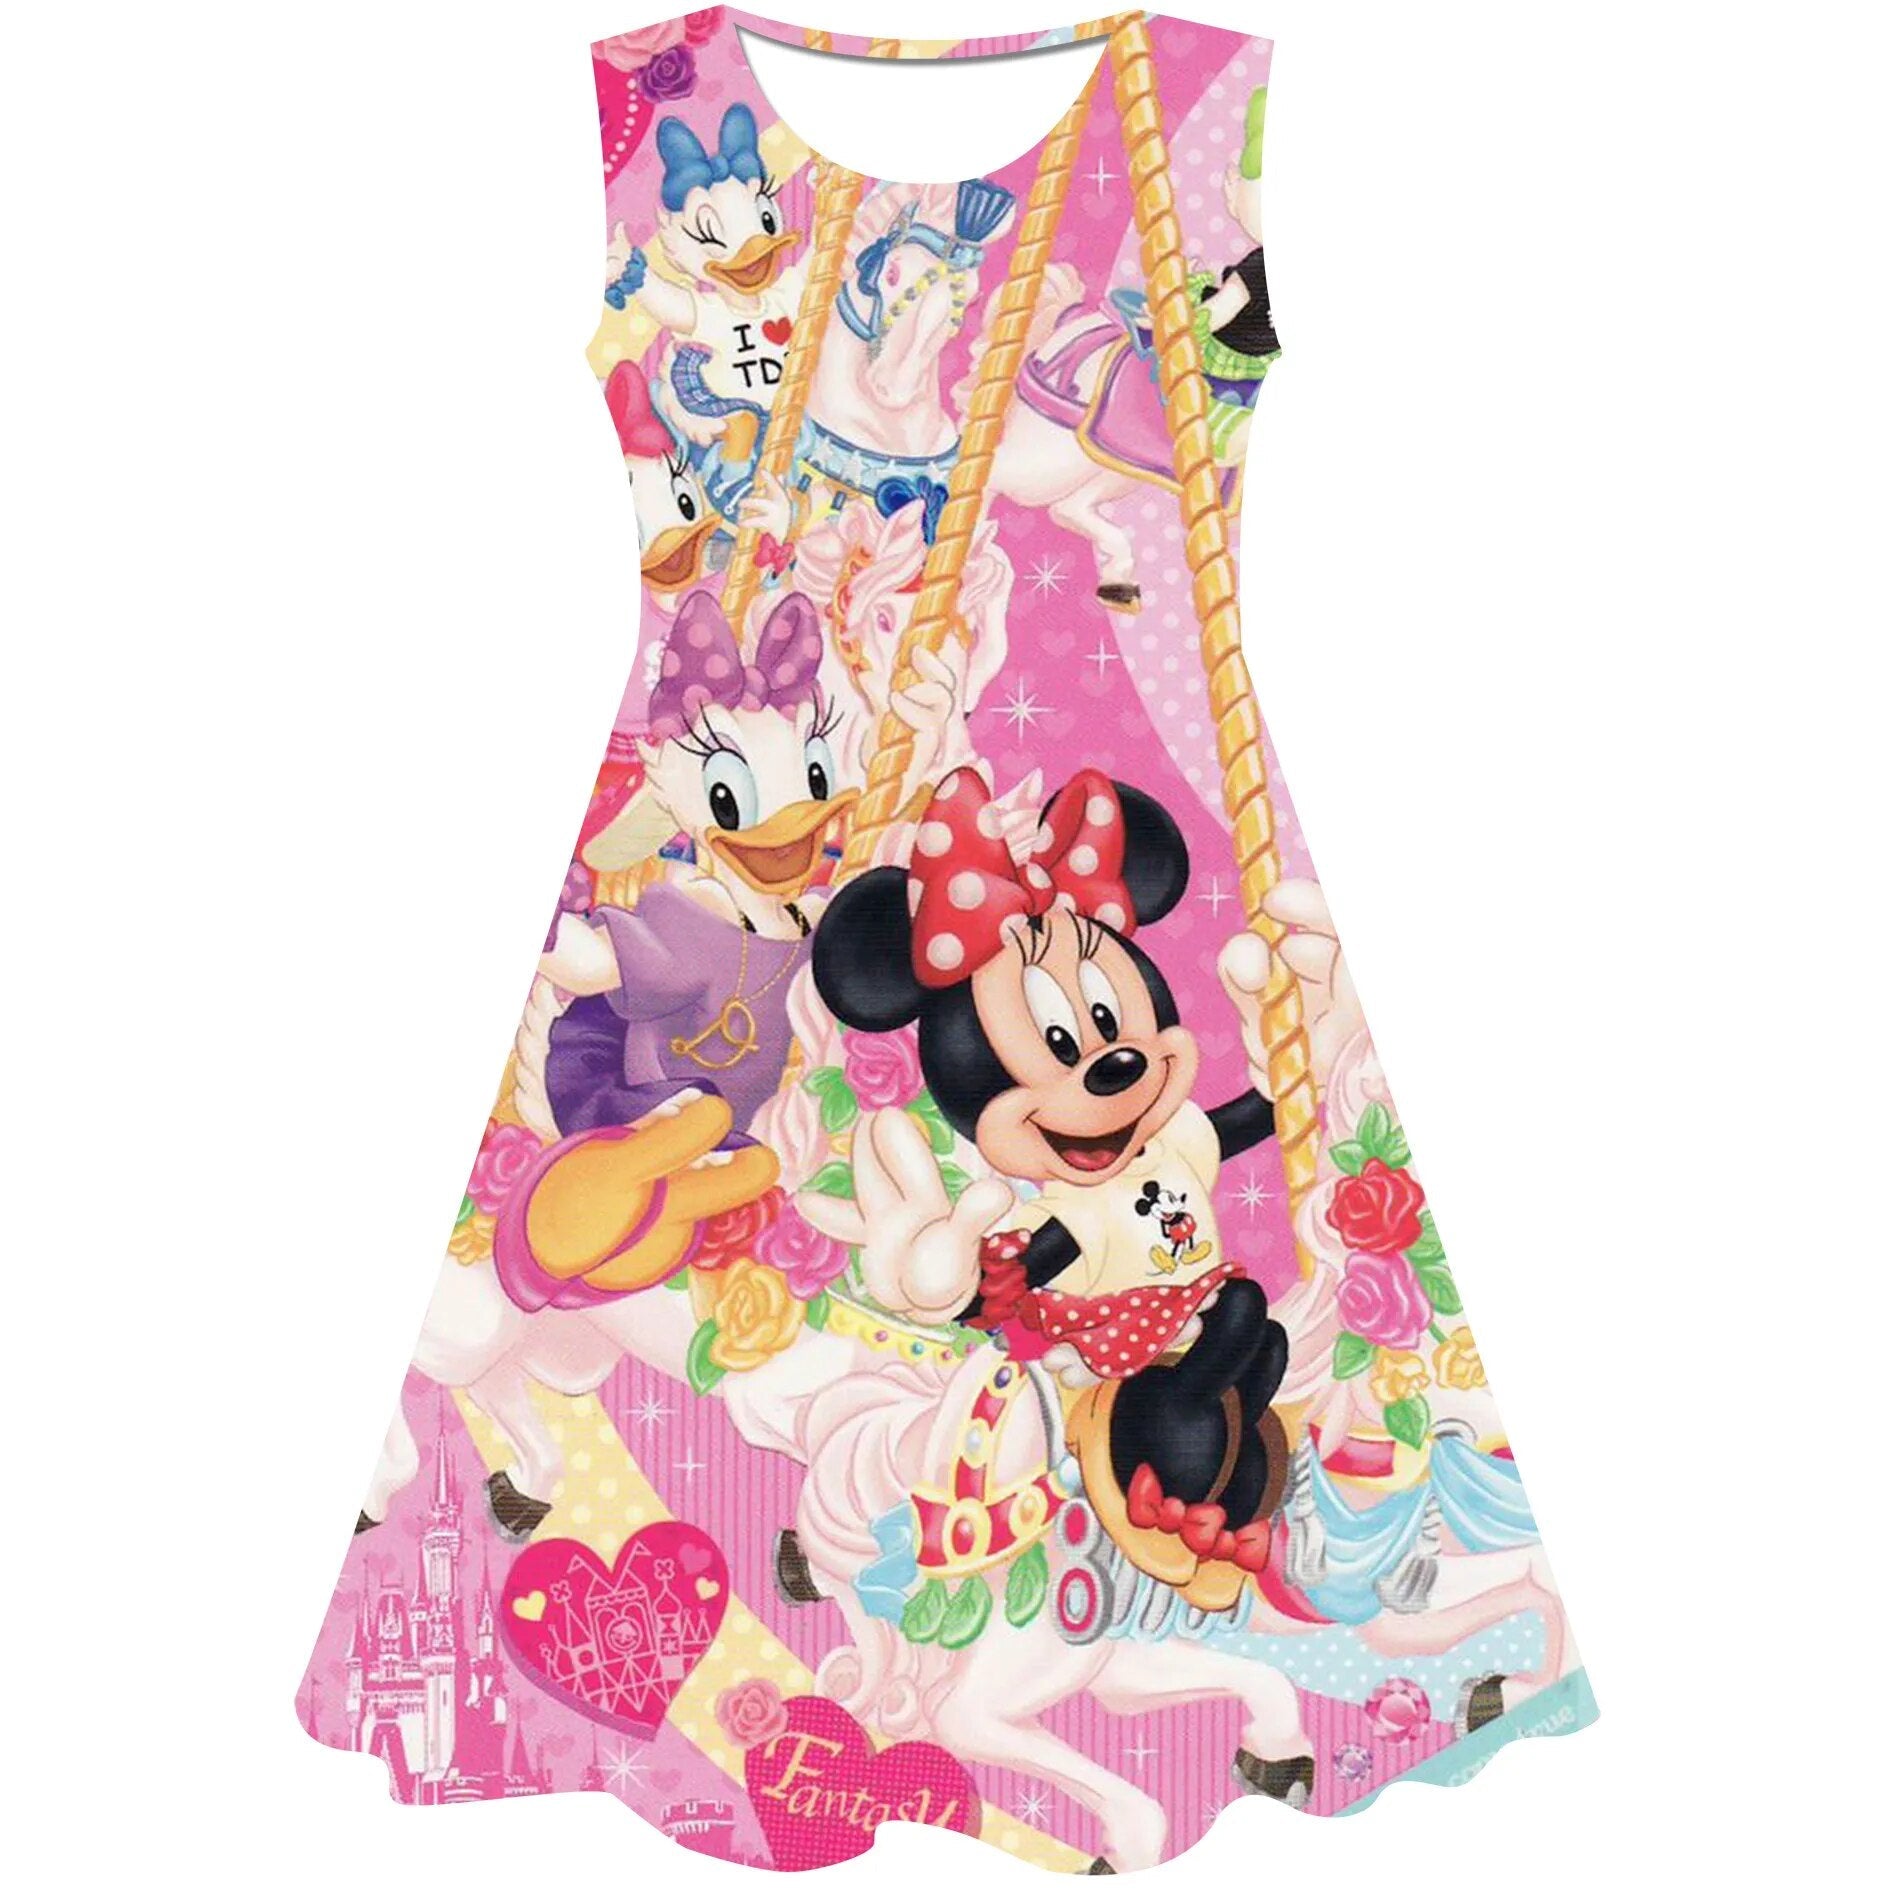 Shop Disney Inspired Casual Dresses at Princess Party Dresses